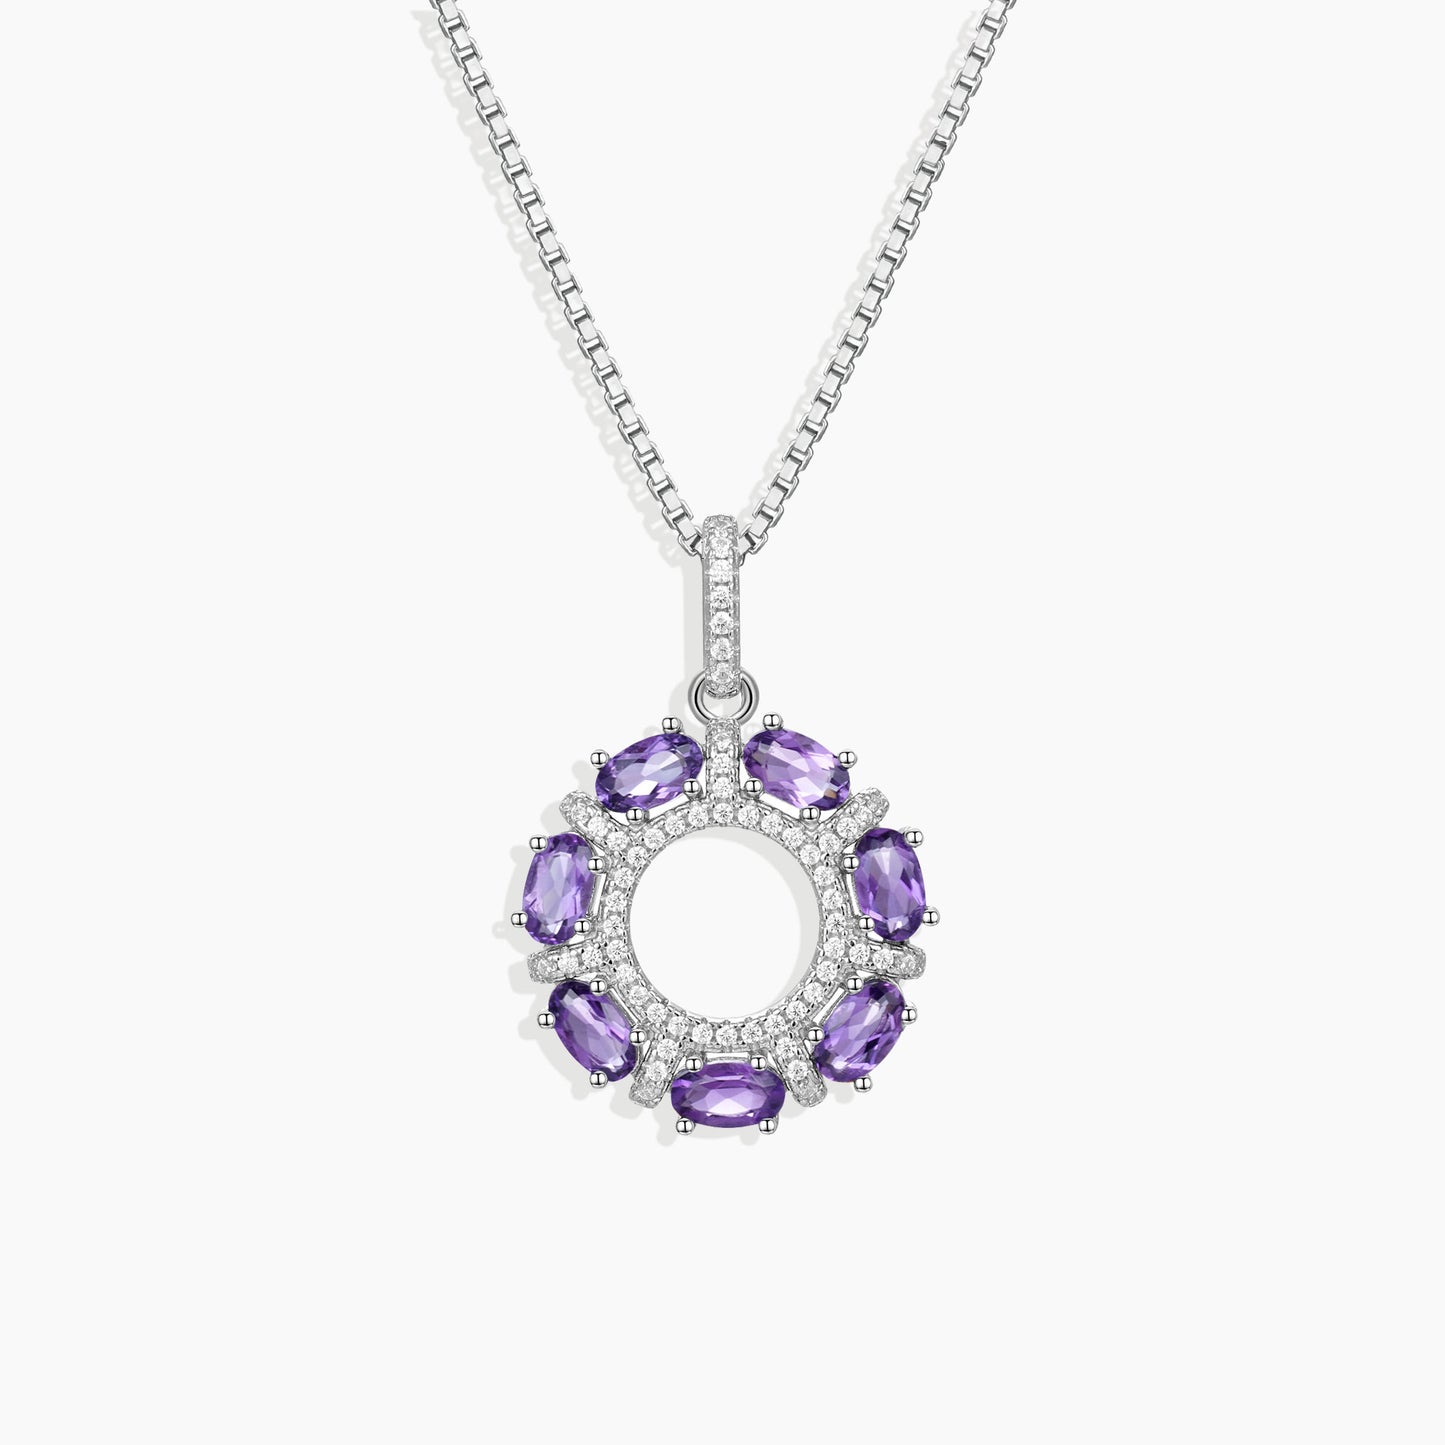 Amethyst Galaxy Pendant Necklace in Sterling Silver